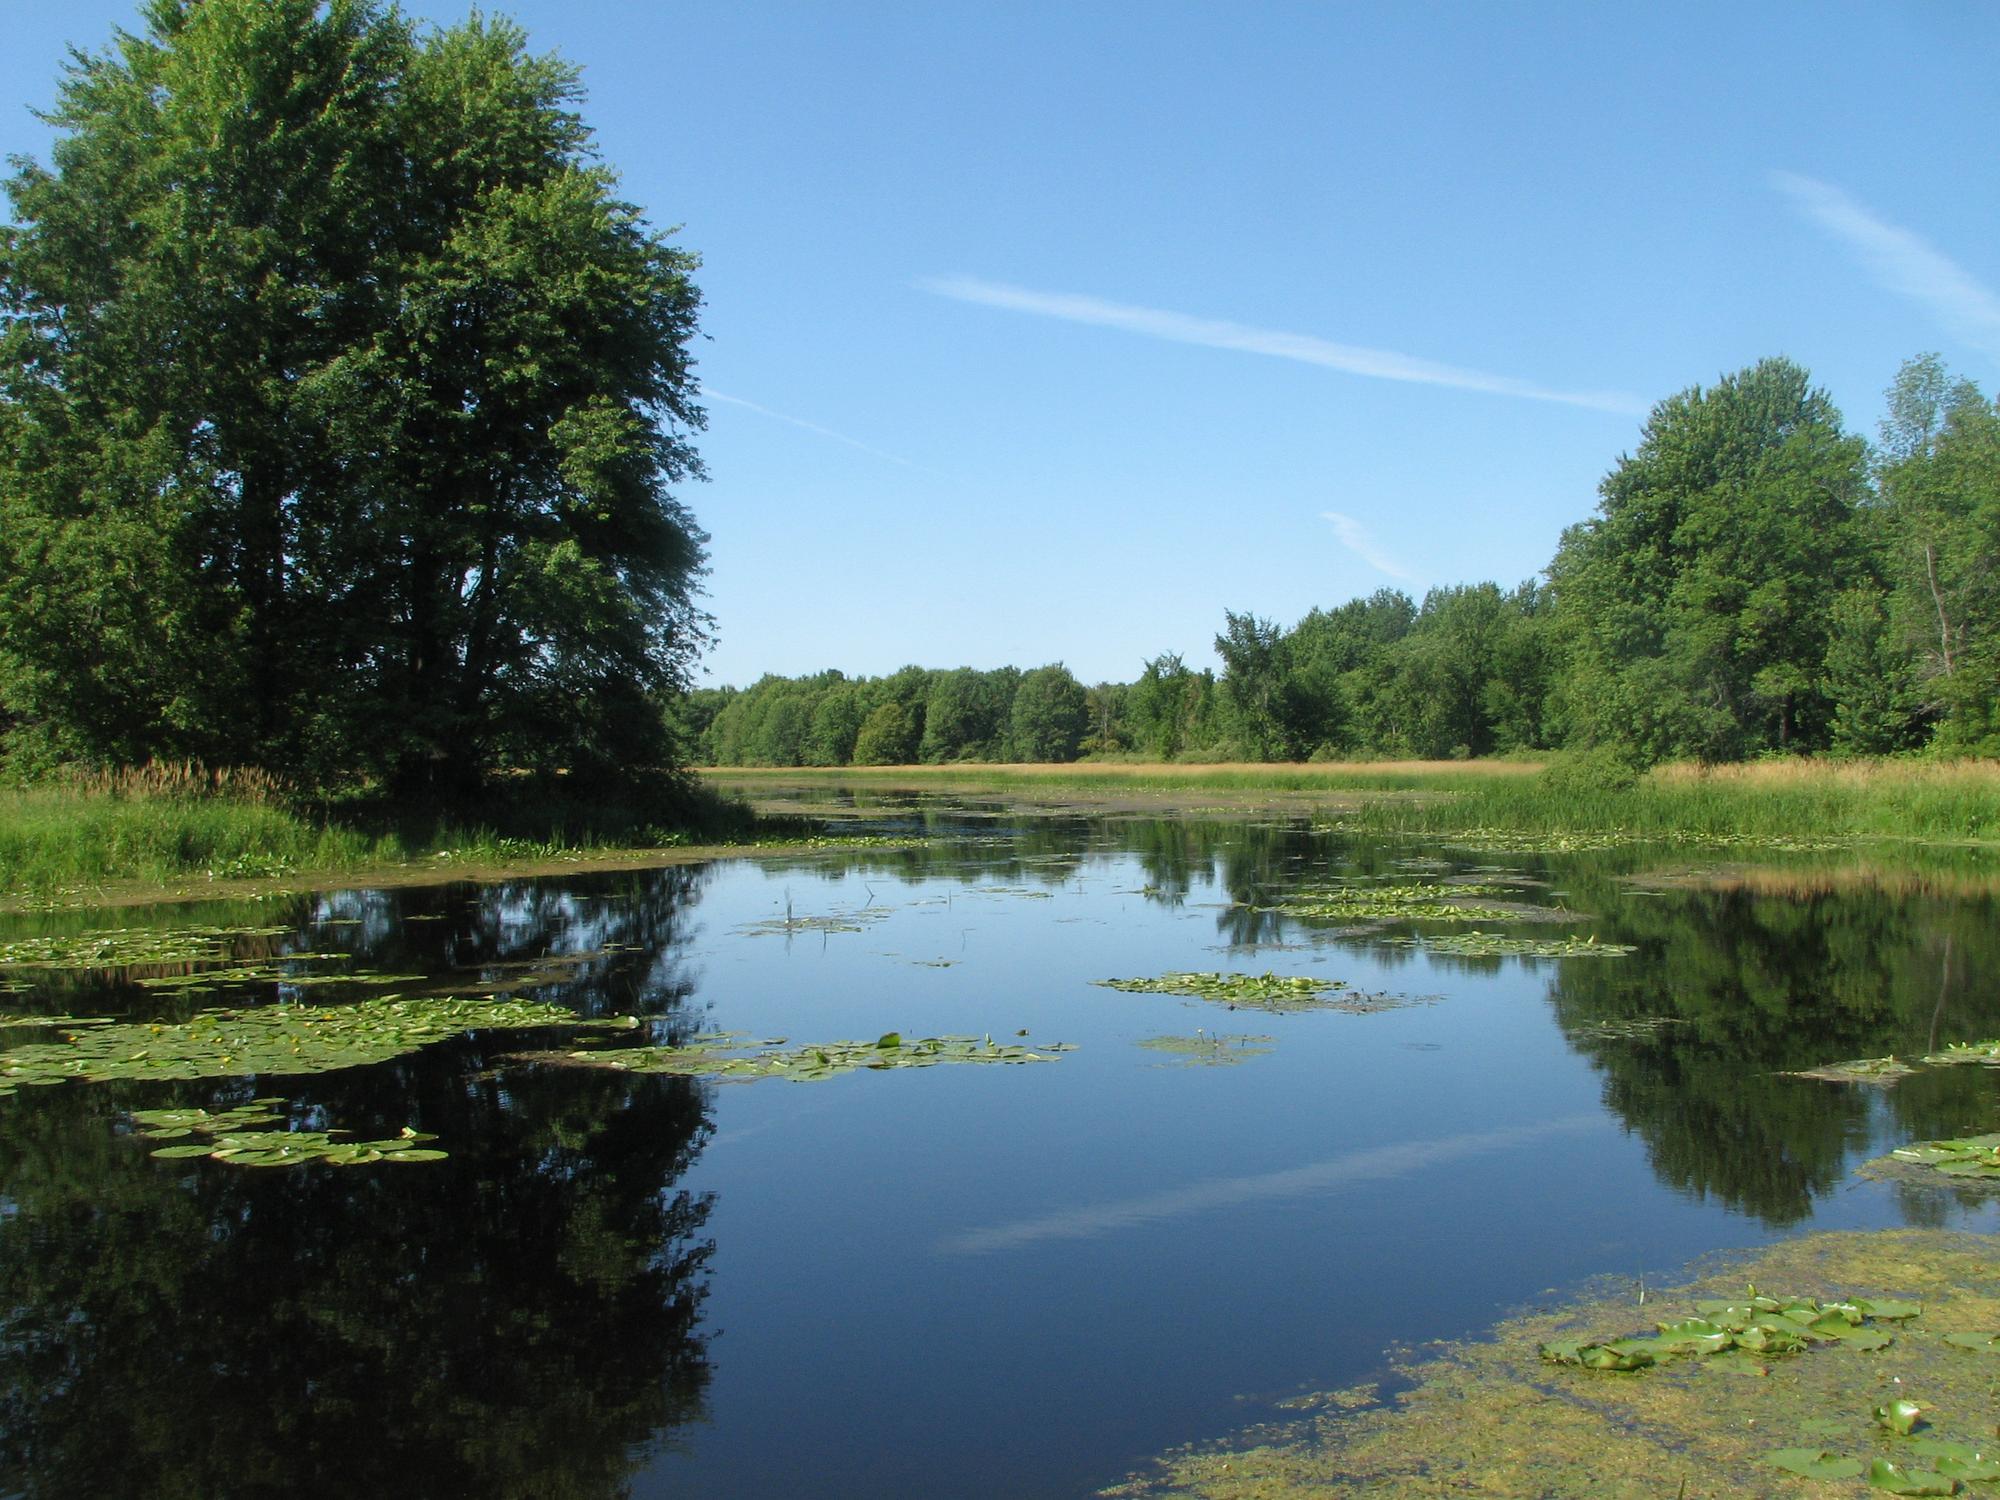 SNC’s watershed evaluation reveals stressed conditions in forest and water natural resources